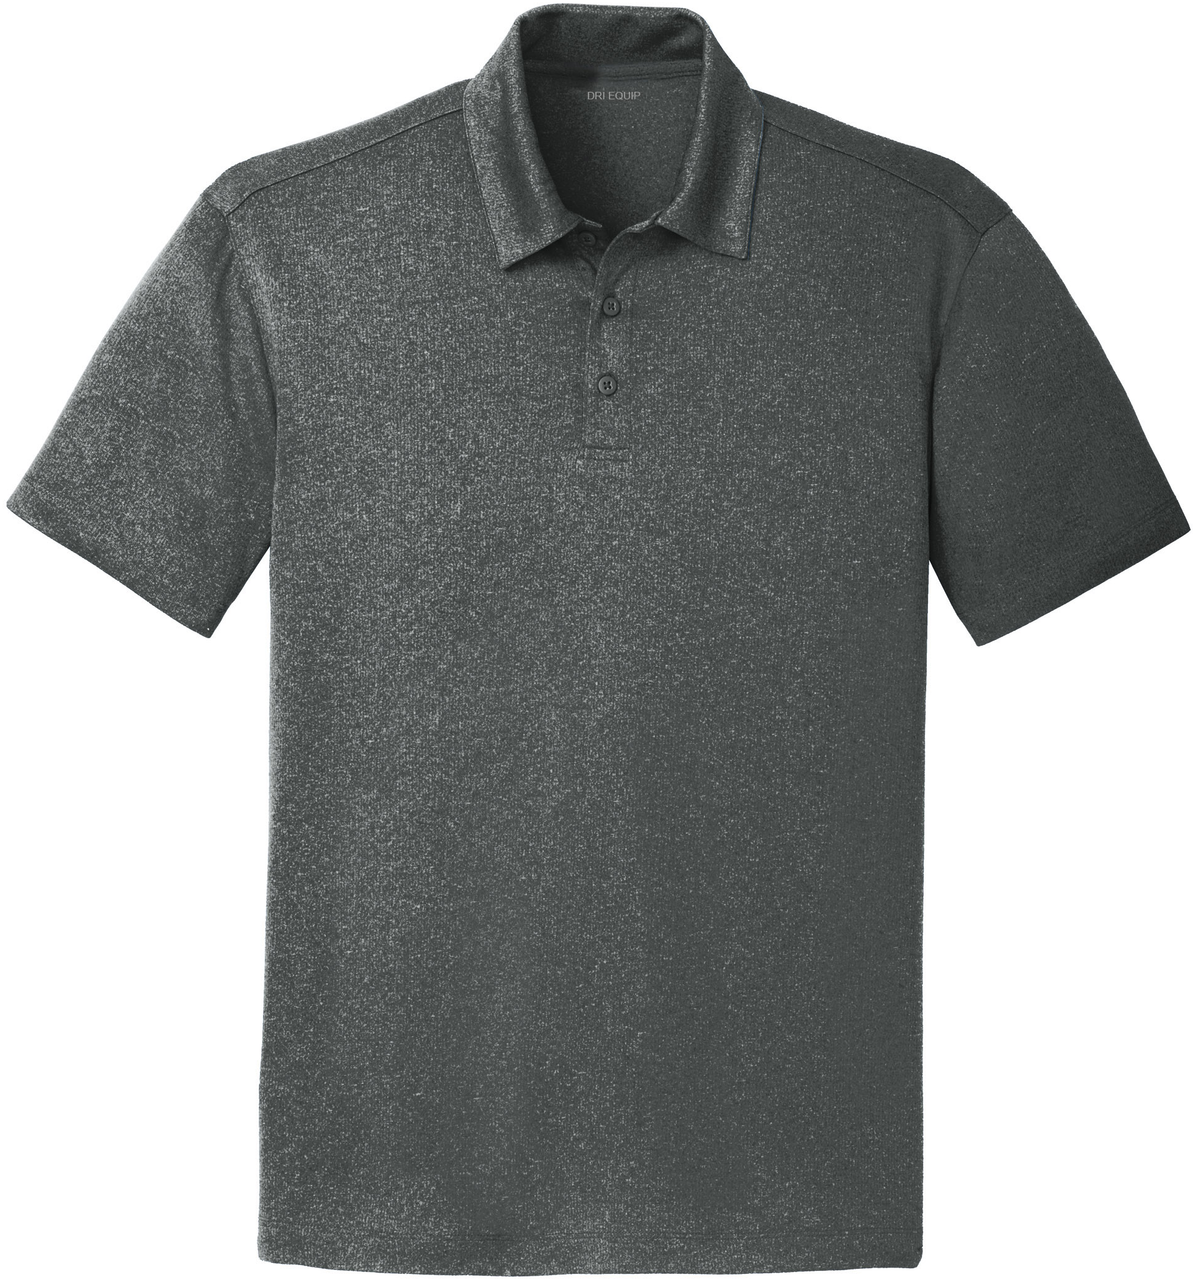 Charcoal Heather Men's Golf Polo